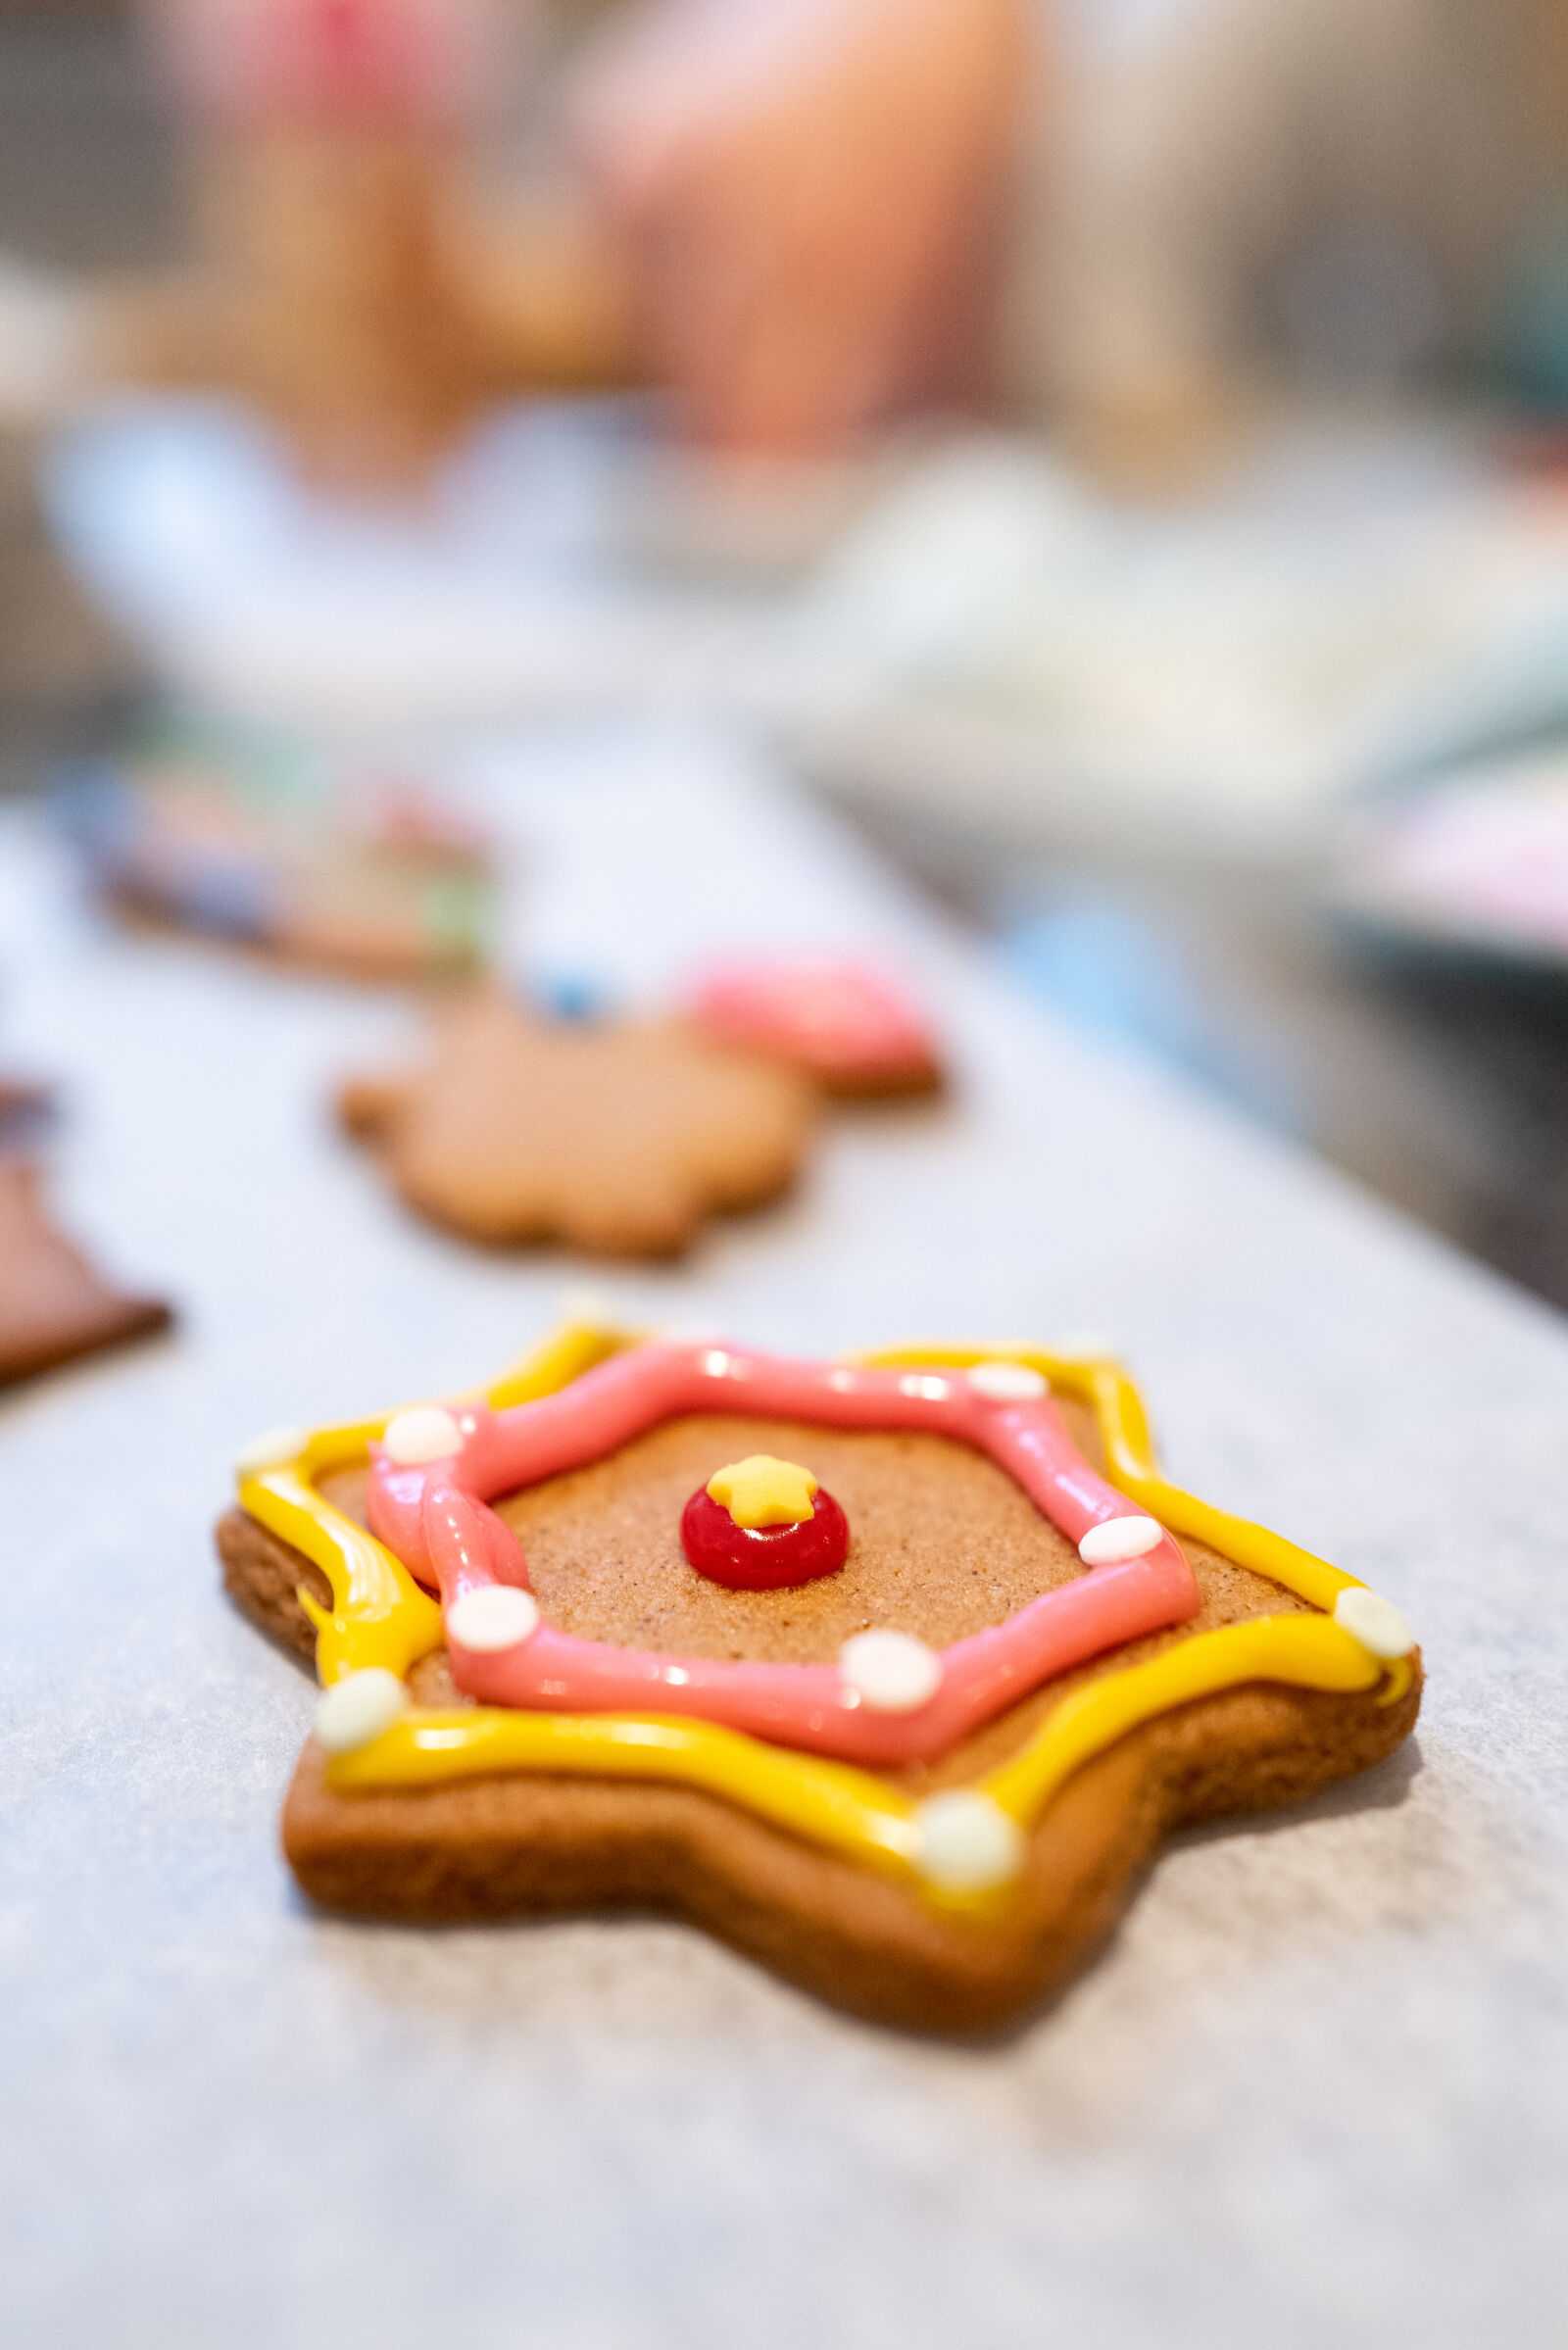 Leica Q2 sample photo. Decorated gingerbread photography